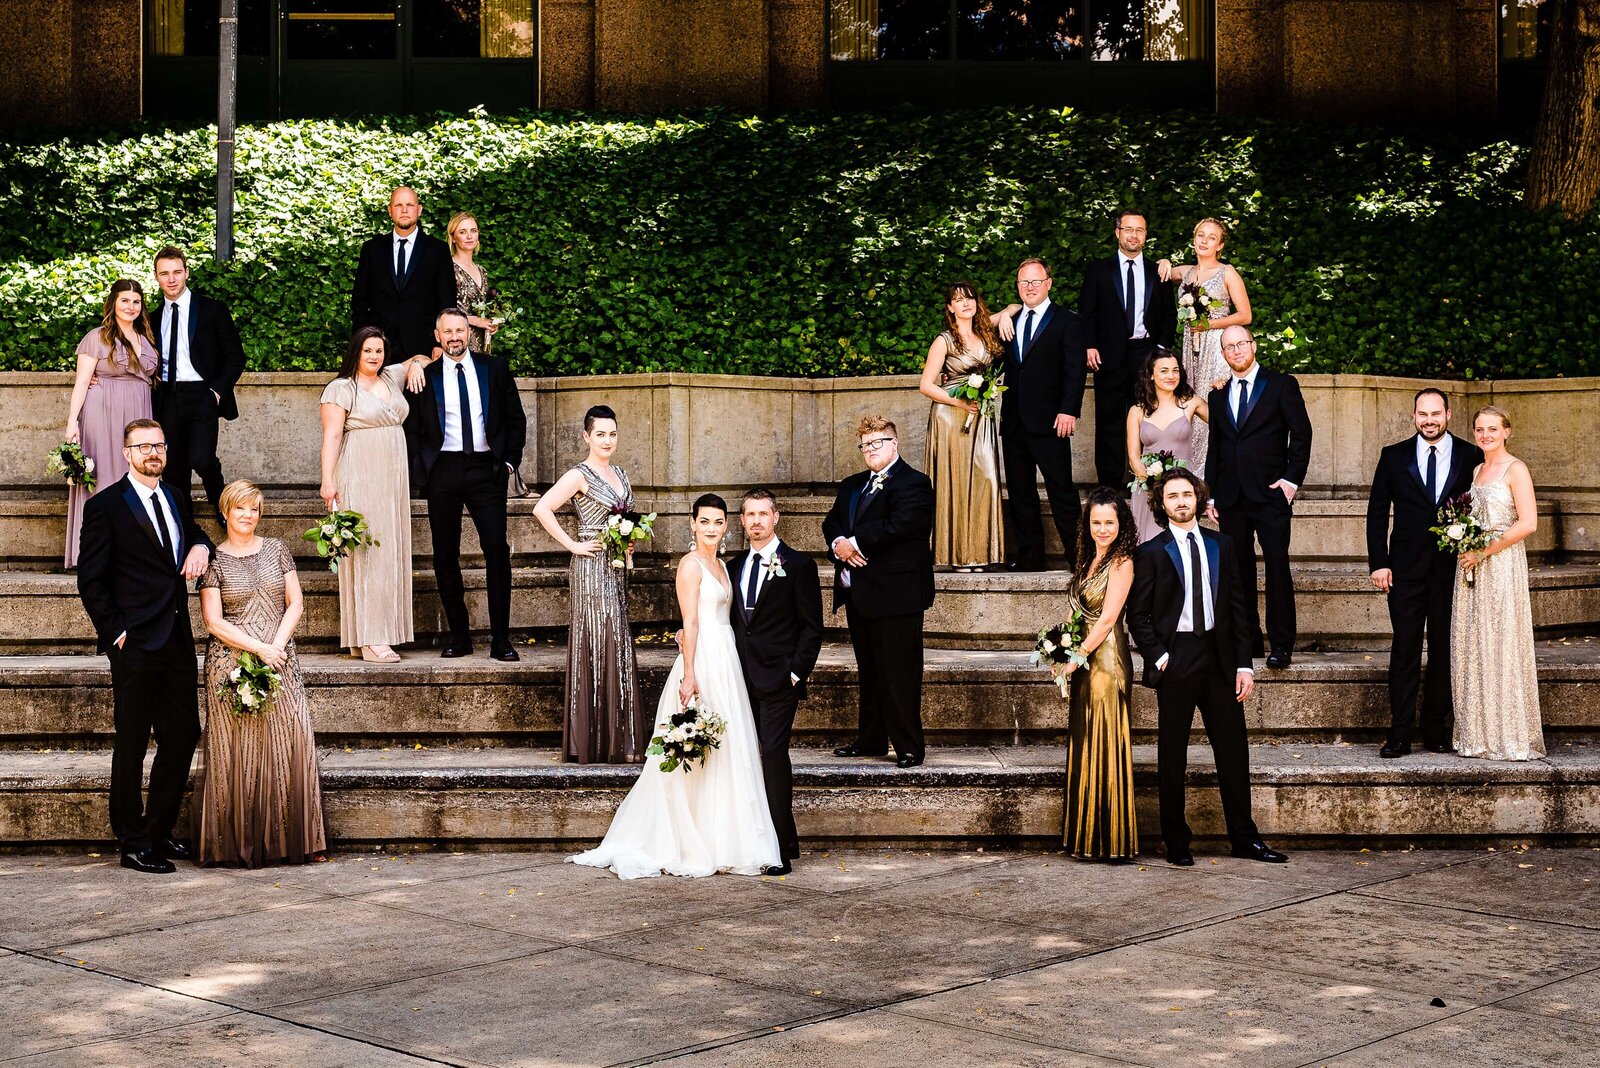 large wedding party in dark suits and metallic dresses poses in downtown Durham, North Carolina